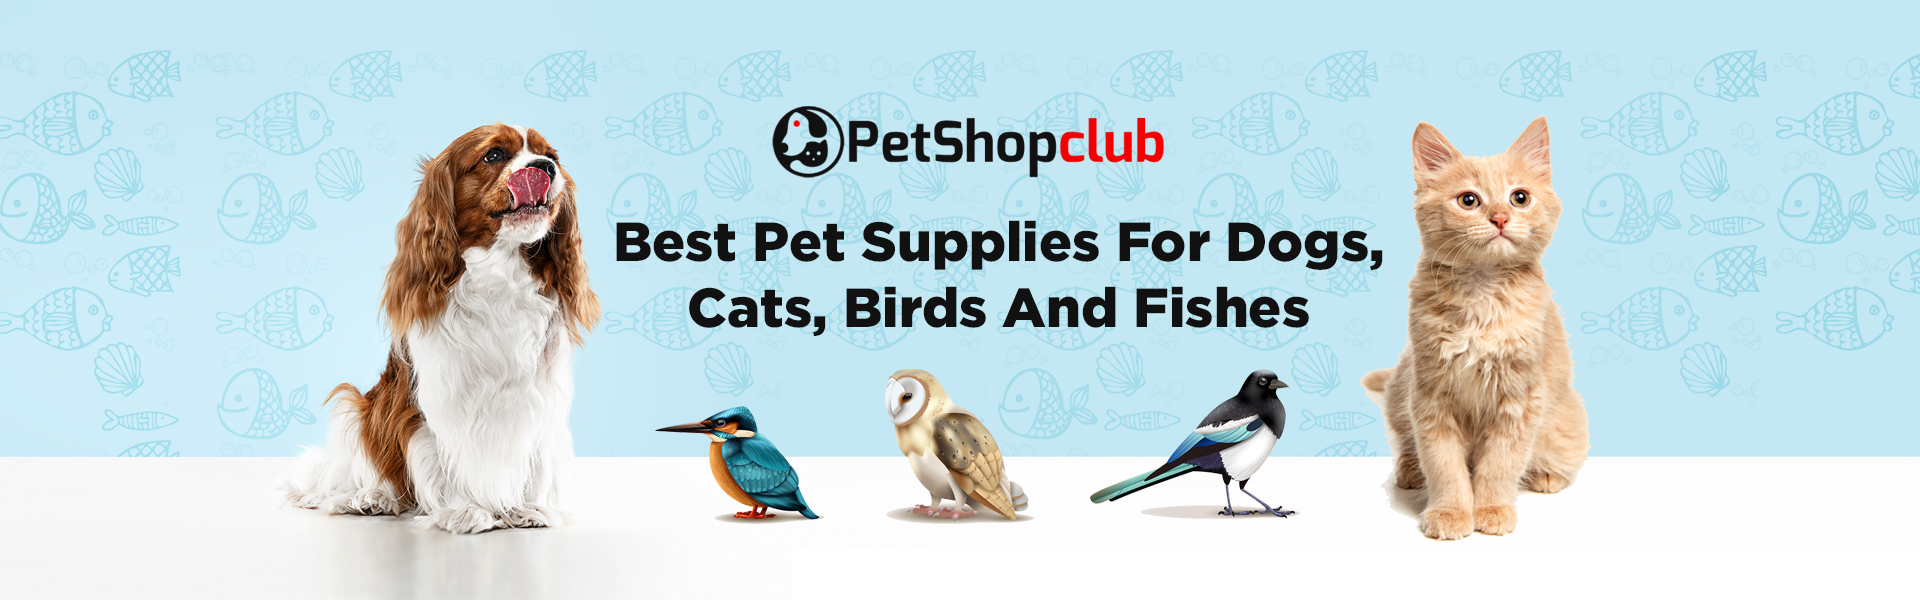 Best Pet Supplies For Dogs, Cats, Birds, And Fishes